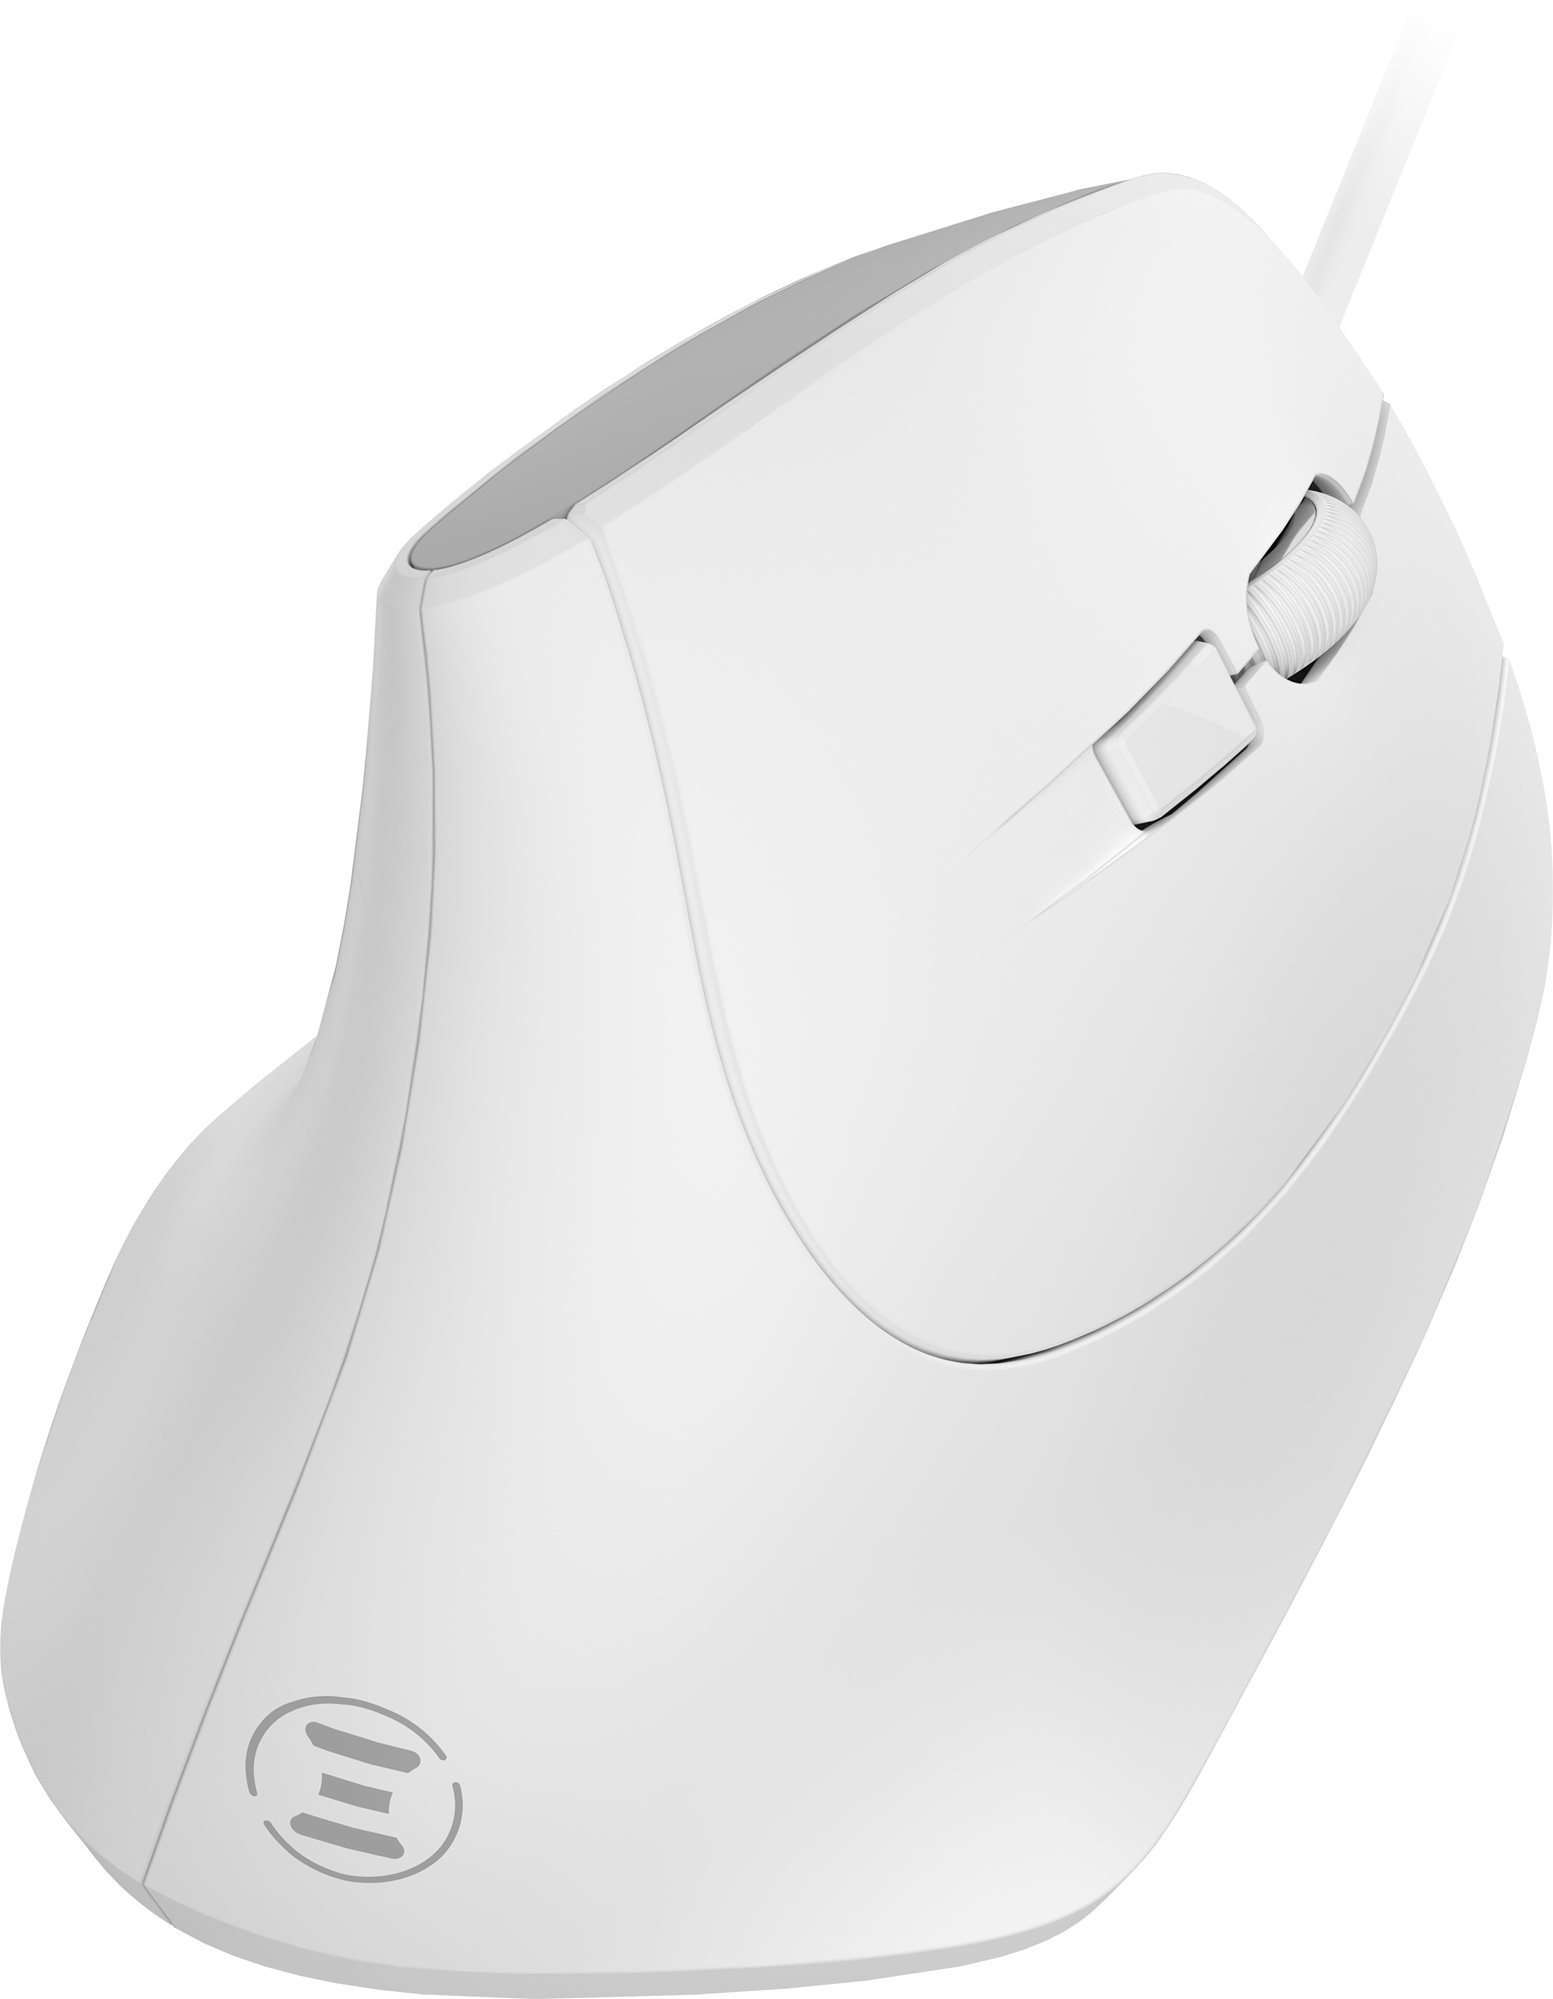 Eternico Wired Vertical Mouse MDV300 fehér